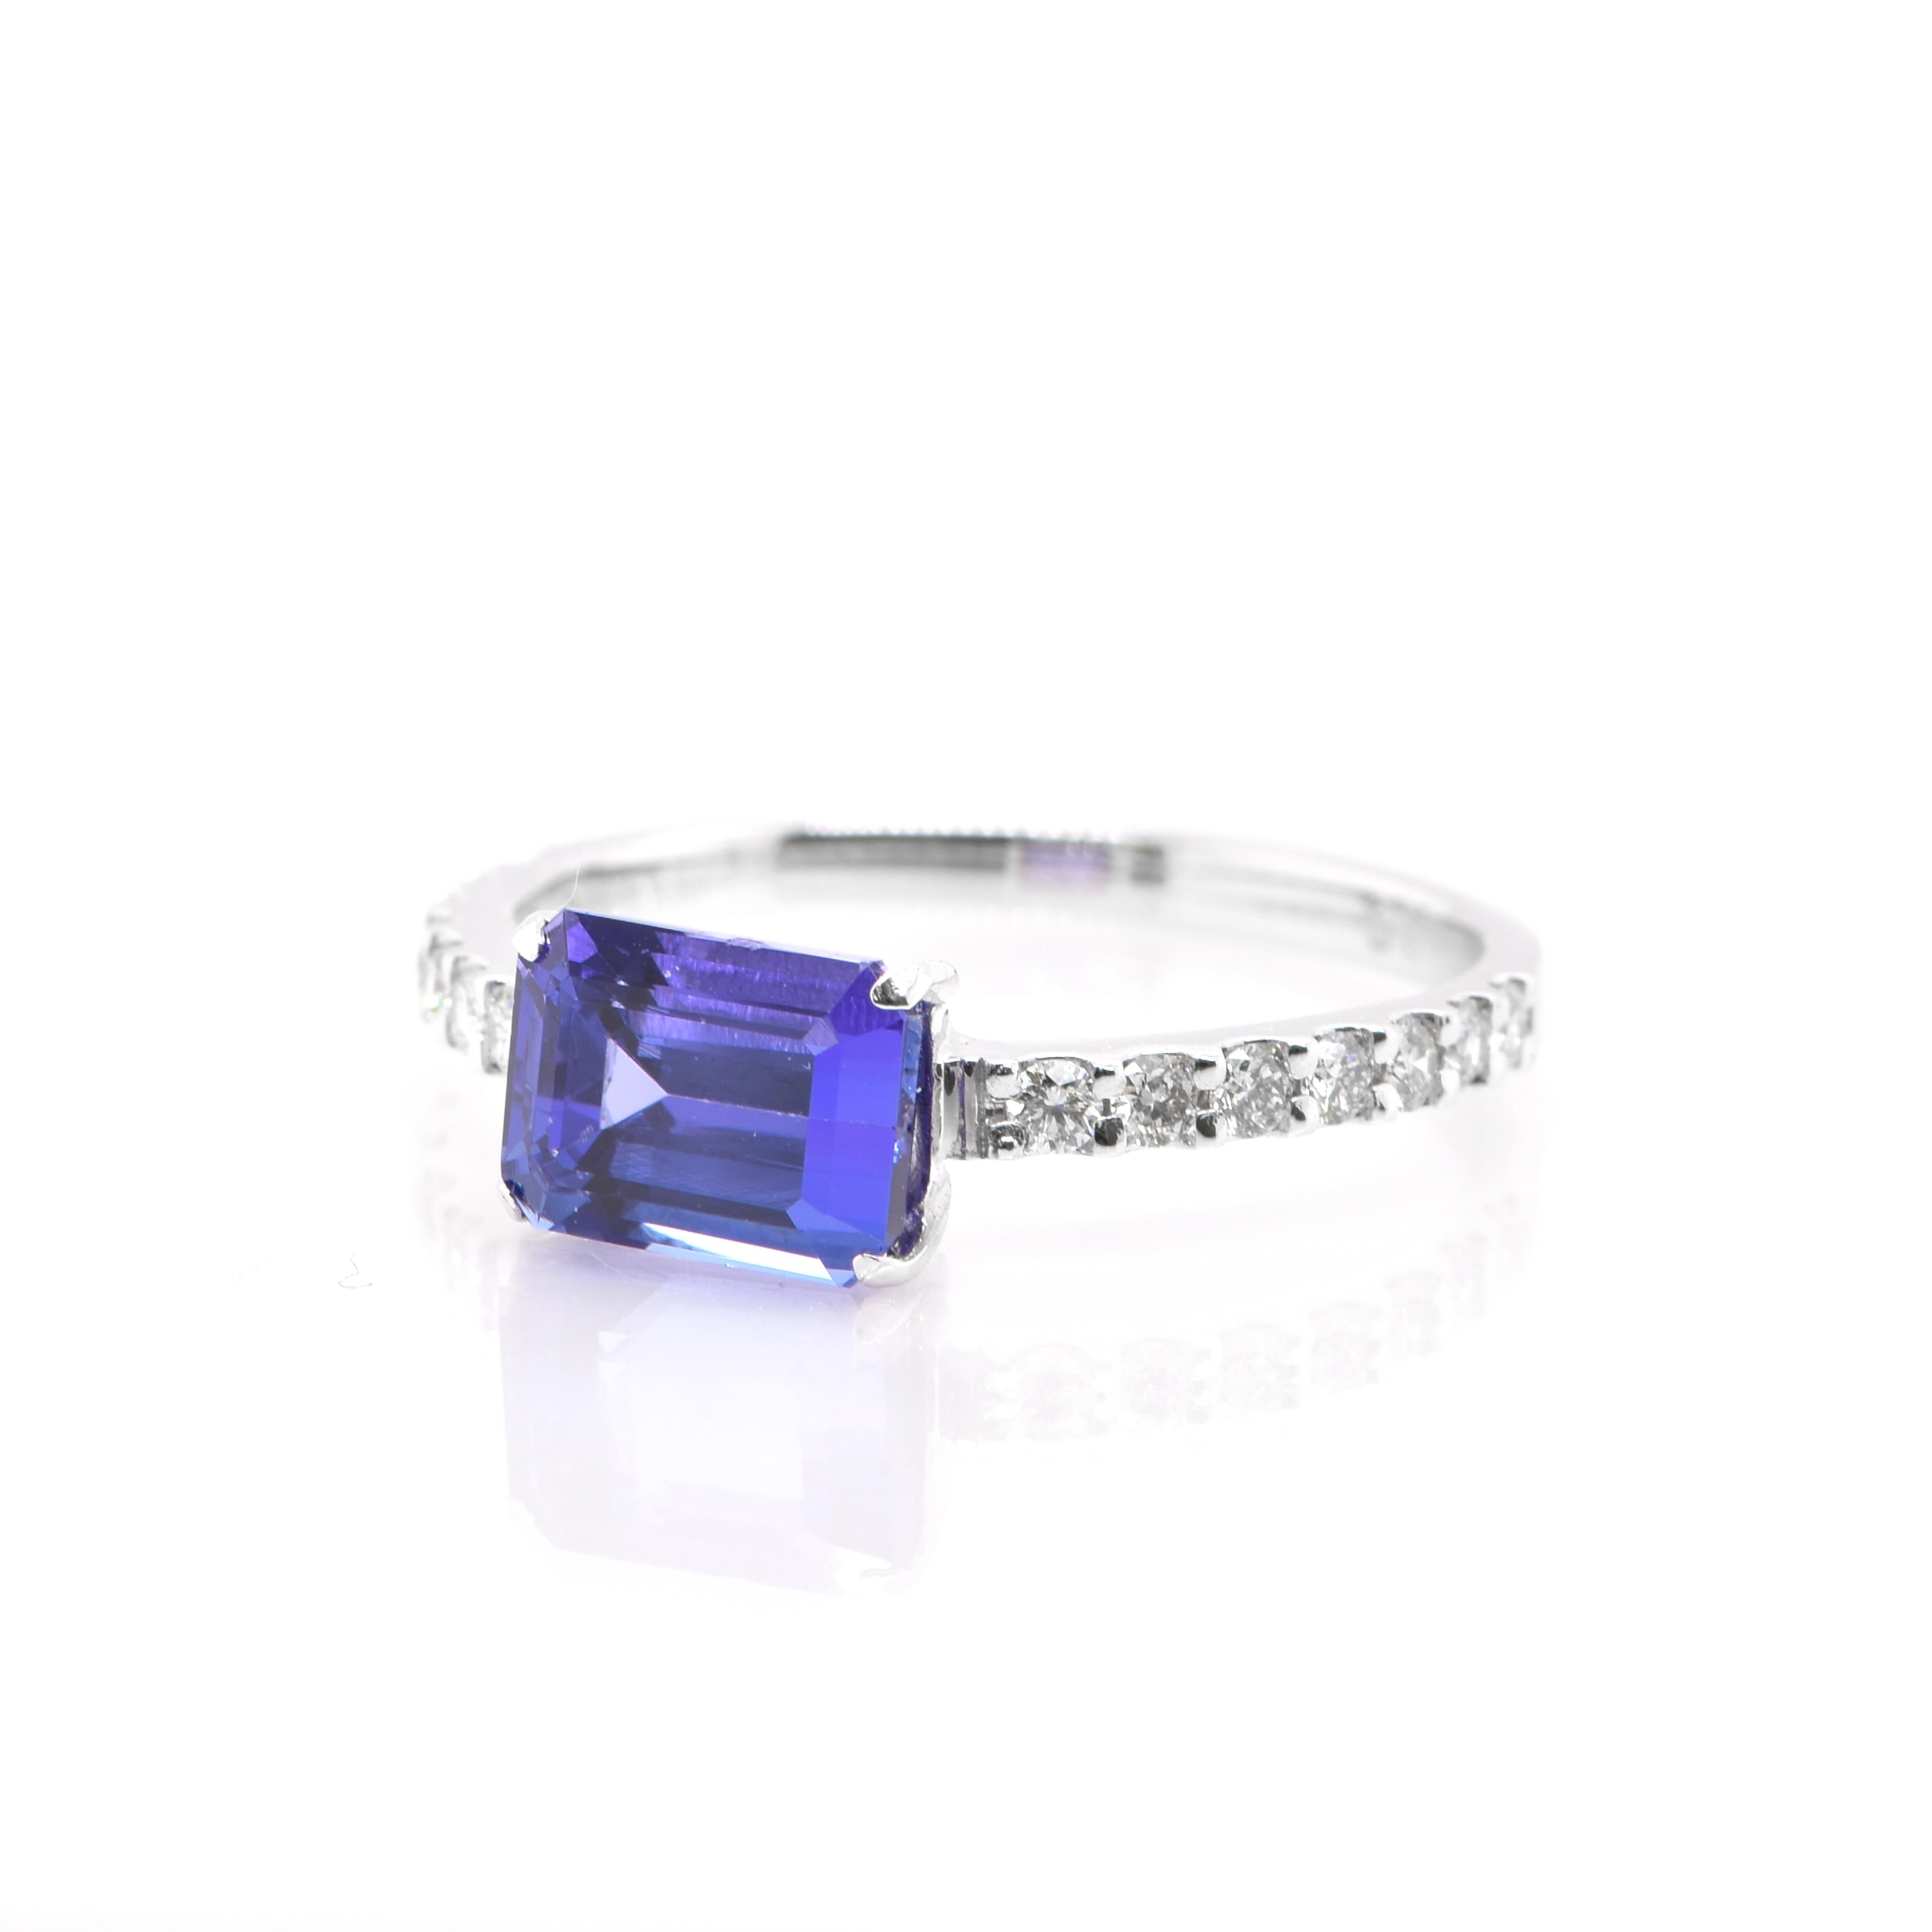 A beautiful Band Ring featuring a 1.91 Carat Natural Tanzanite and 0.25 Carats of Diamond Accents set in Platinum. Tanzanite's name was given by Tiffany and Co after its only known source: Tanzania. Tanzanite displays beautiful pleochroic colors